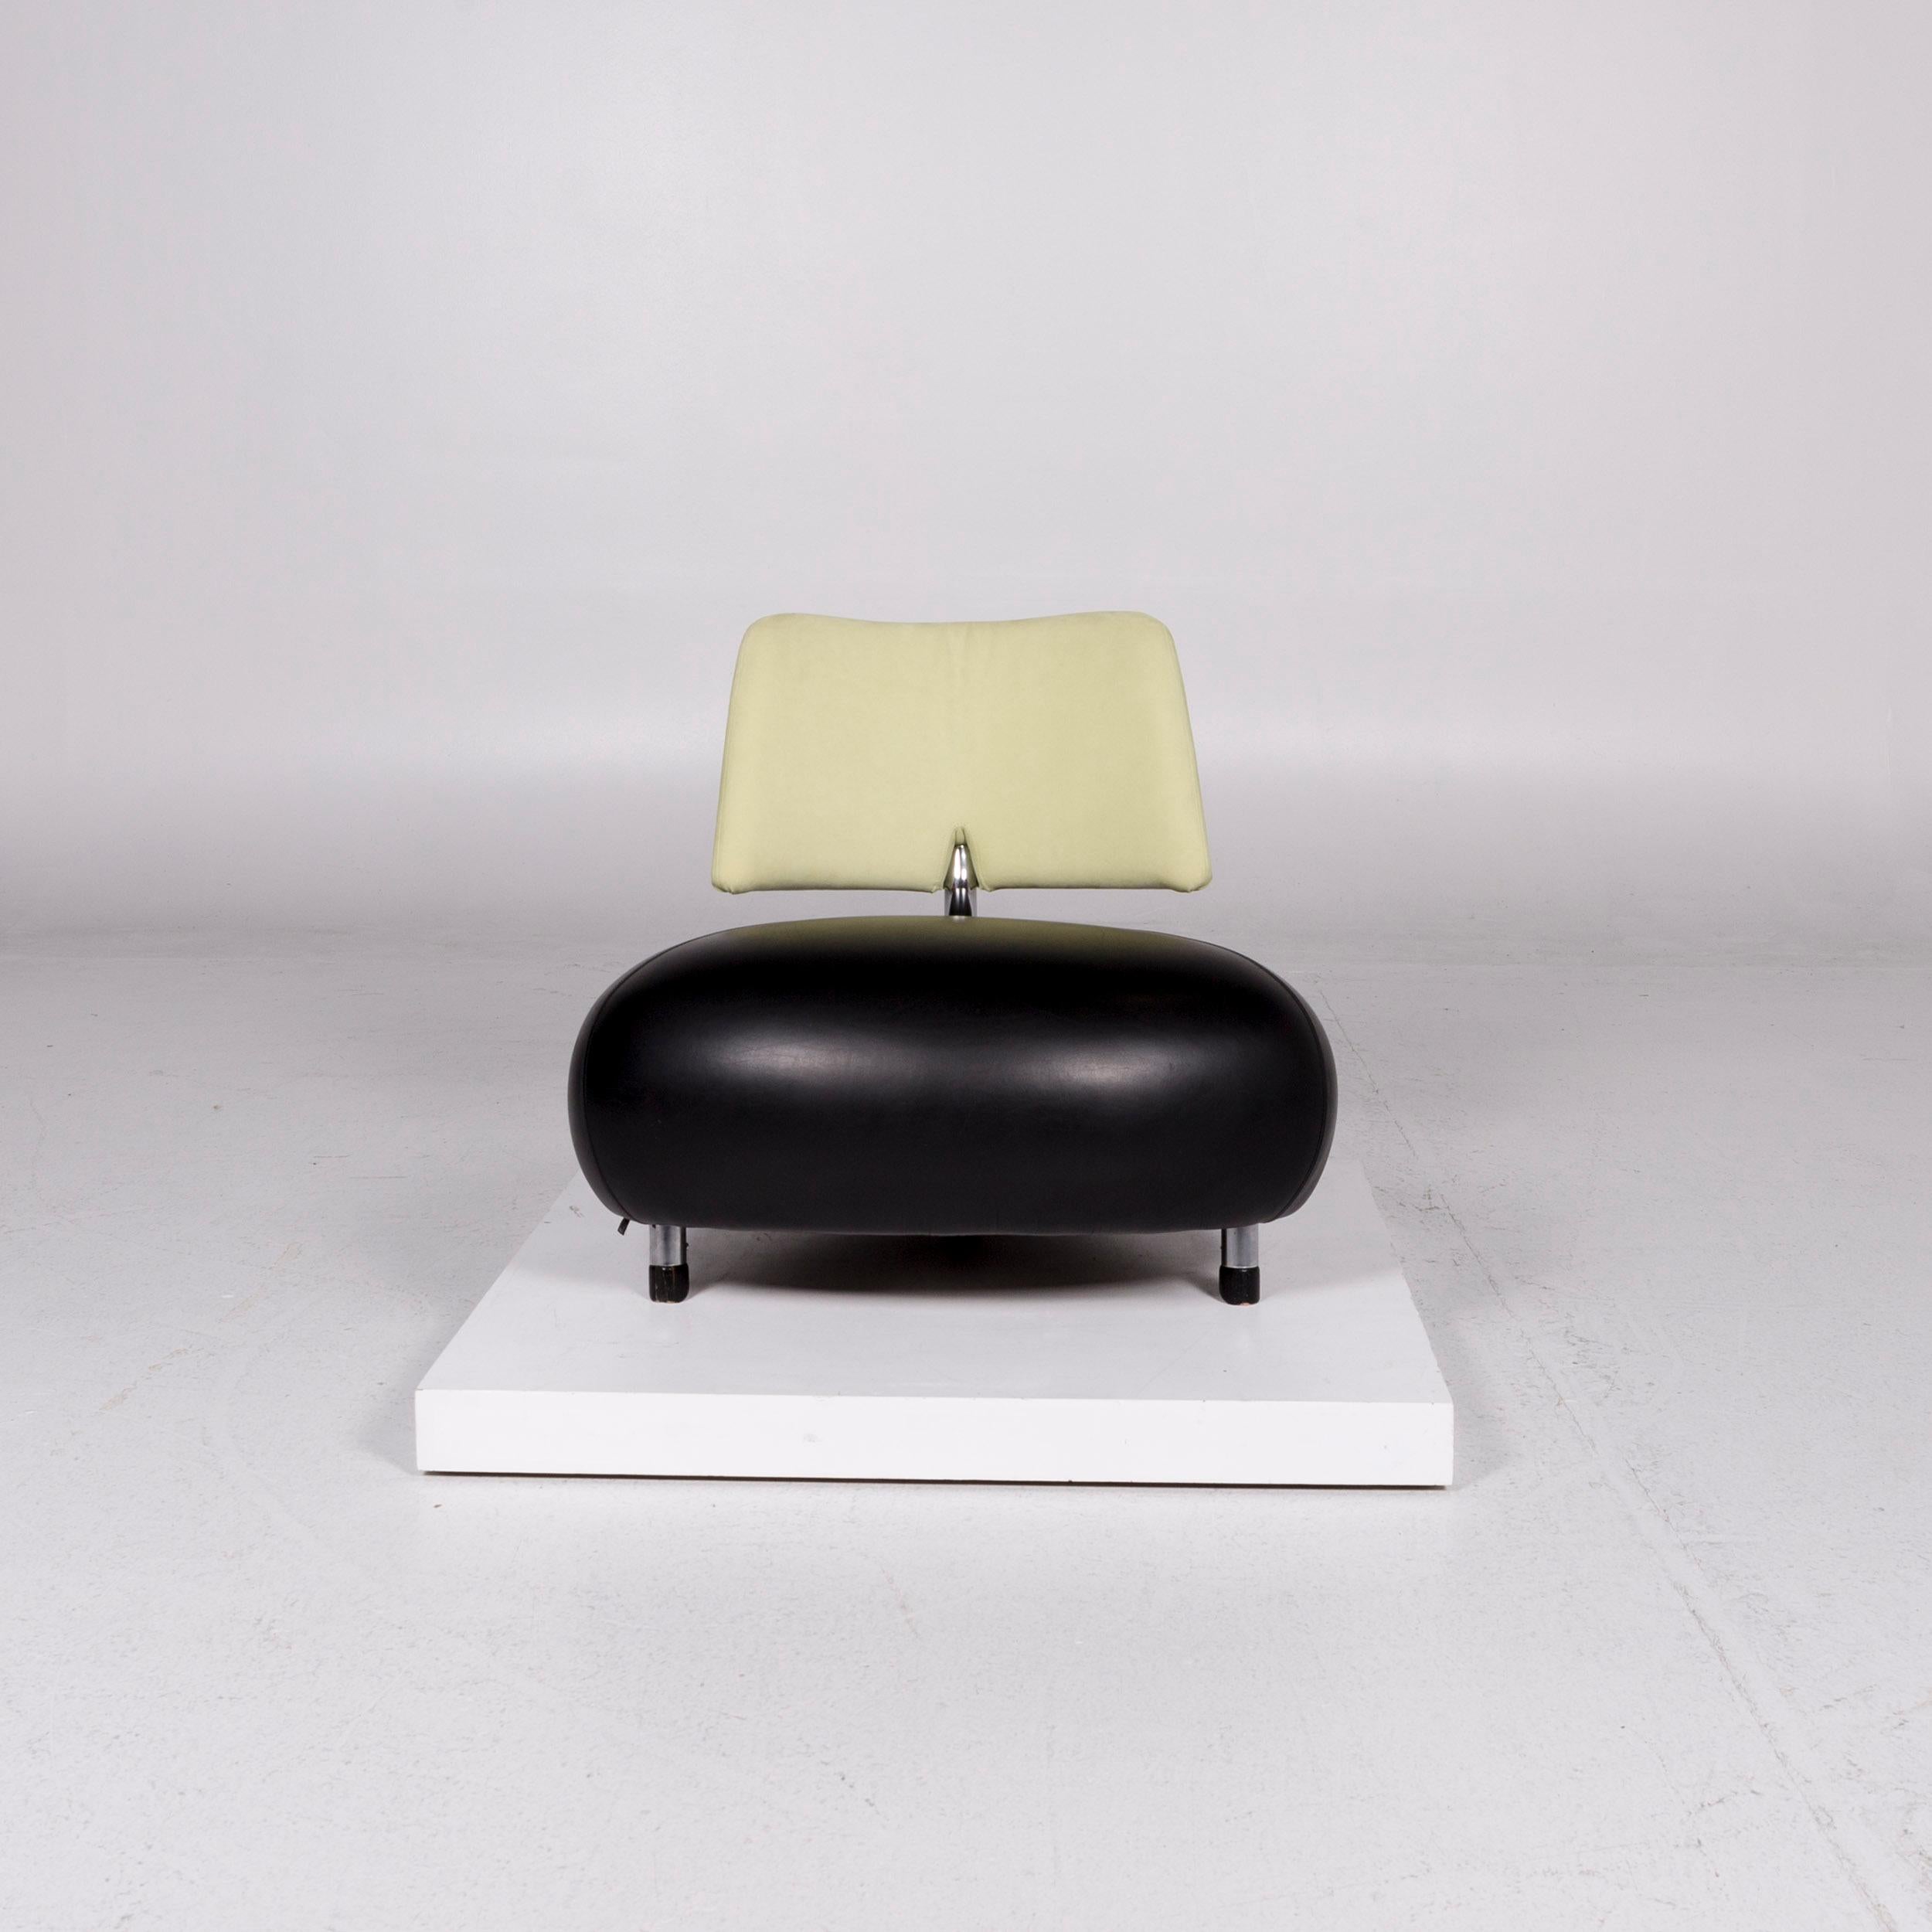 We bring to you a Leolux Pallone Pa leather armchair black.
 
 Product measurements in centimeters:
 
Depth 82
Width 84
Height 77
Seat-height 41
Seat-depth 62
Seat-width 84
Back-height 34.

             